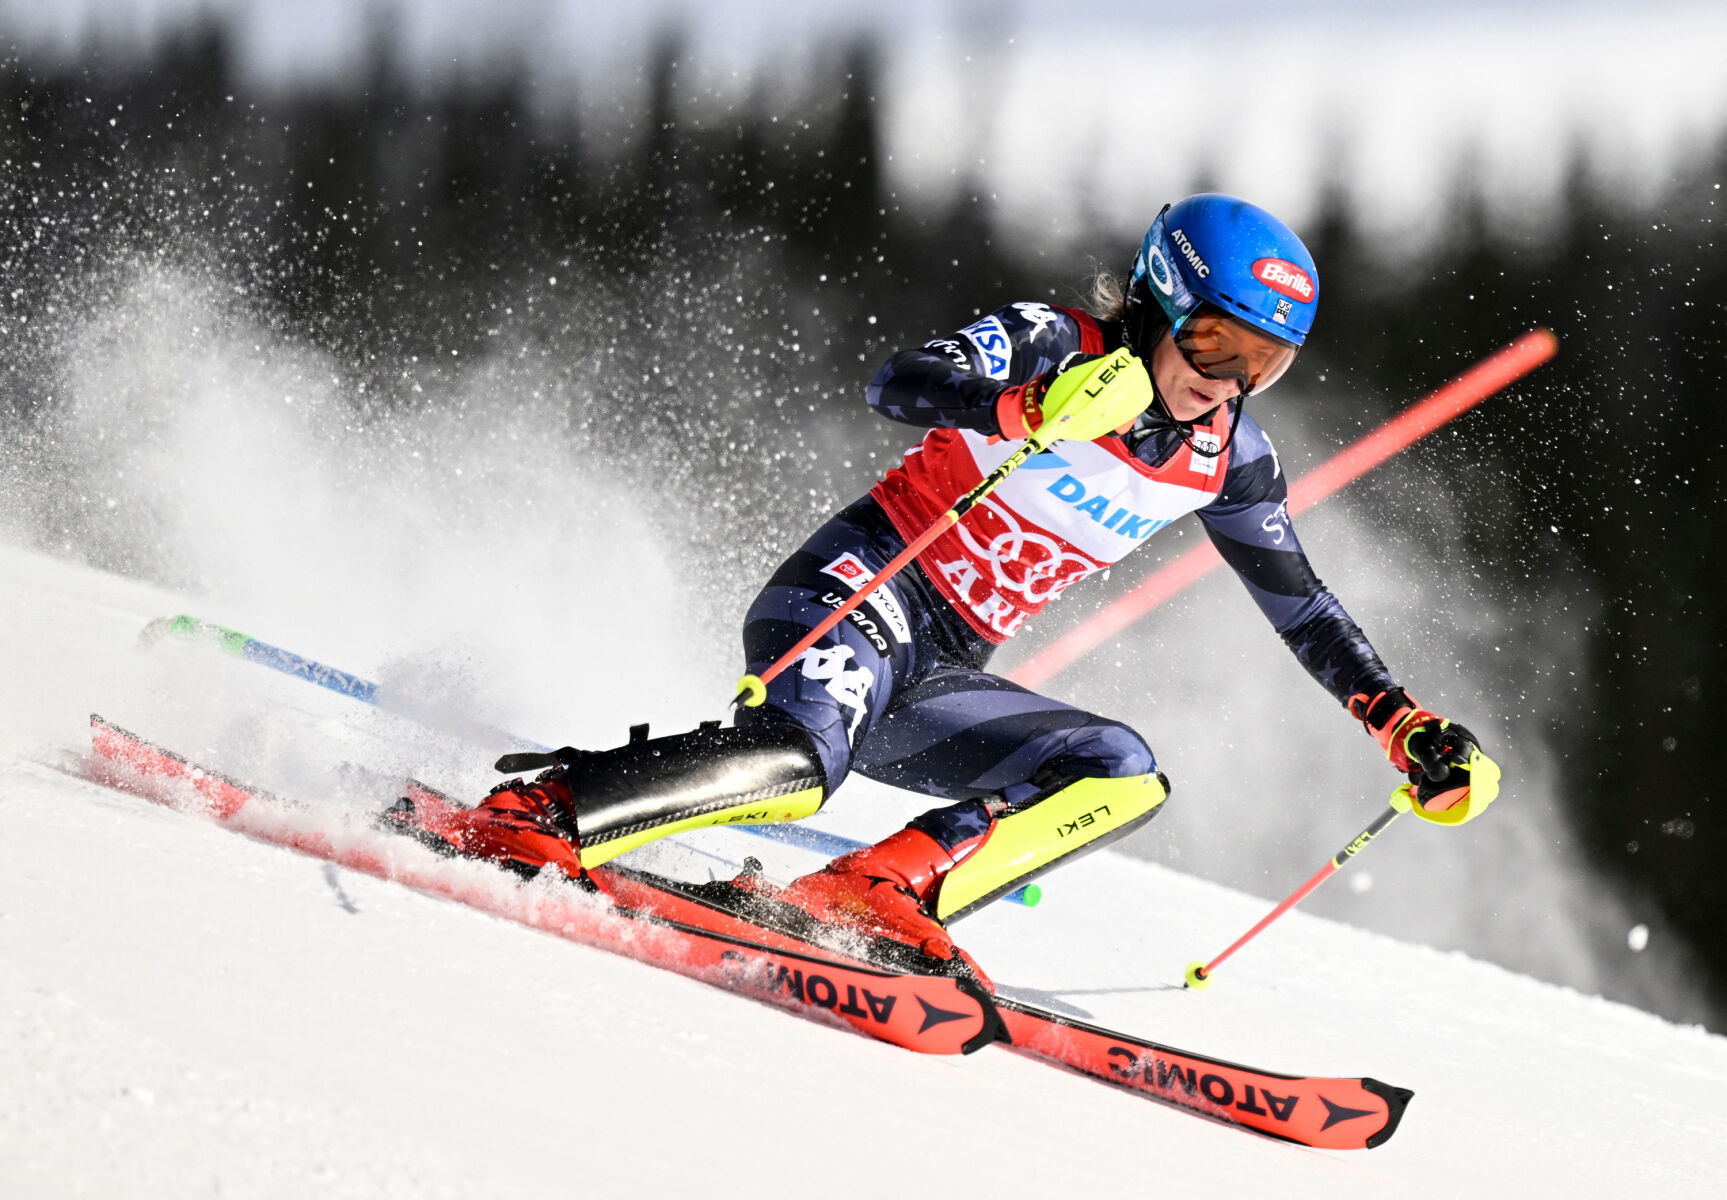 Mikaela Shiffrin breaks all-time skiing record with 87th World Cup win Sports wrex